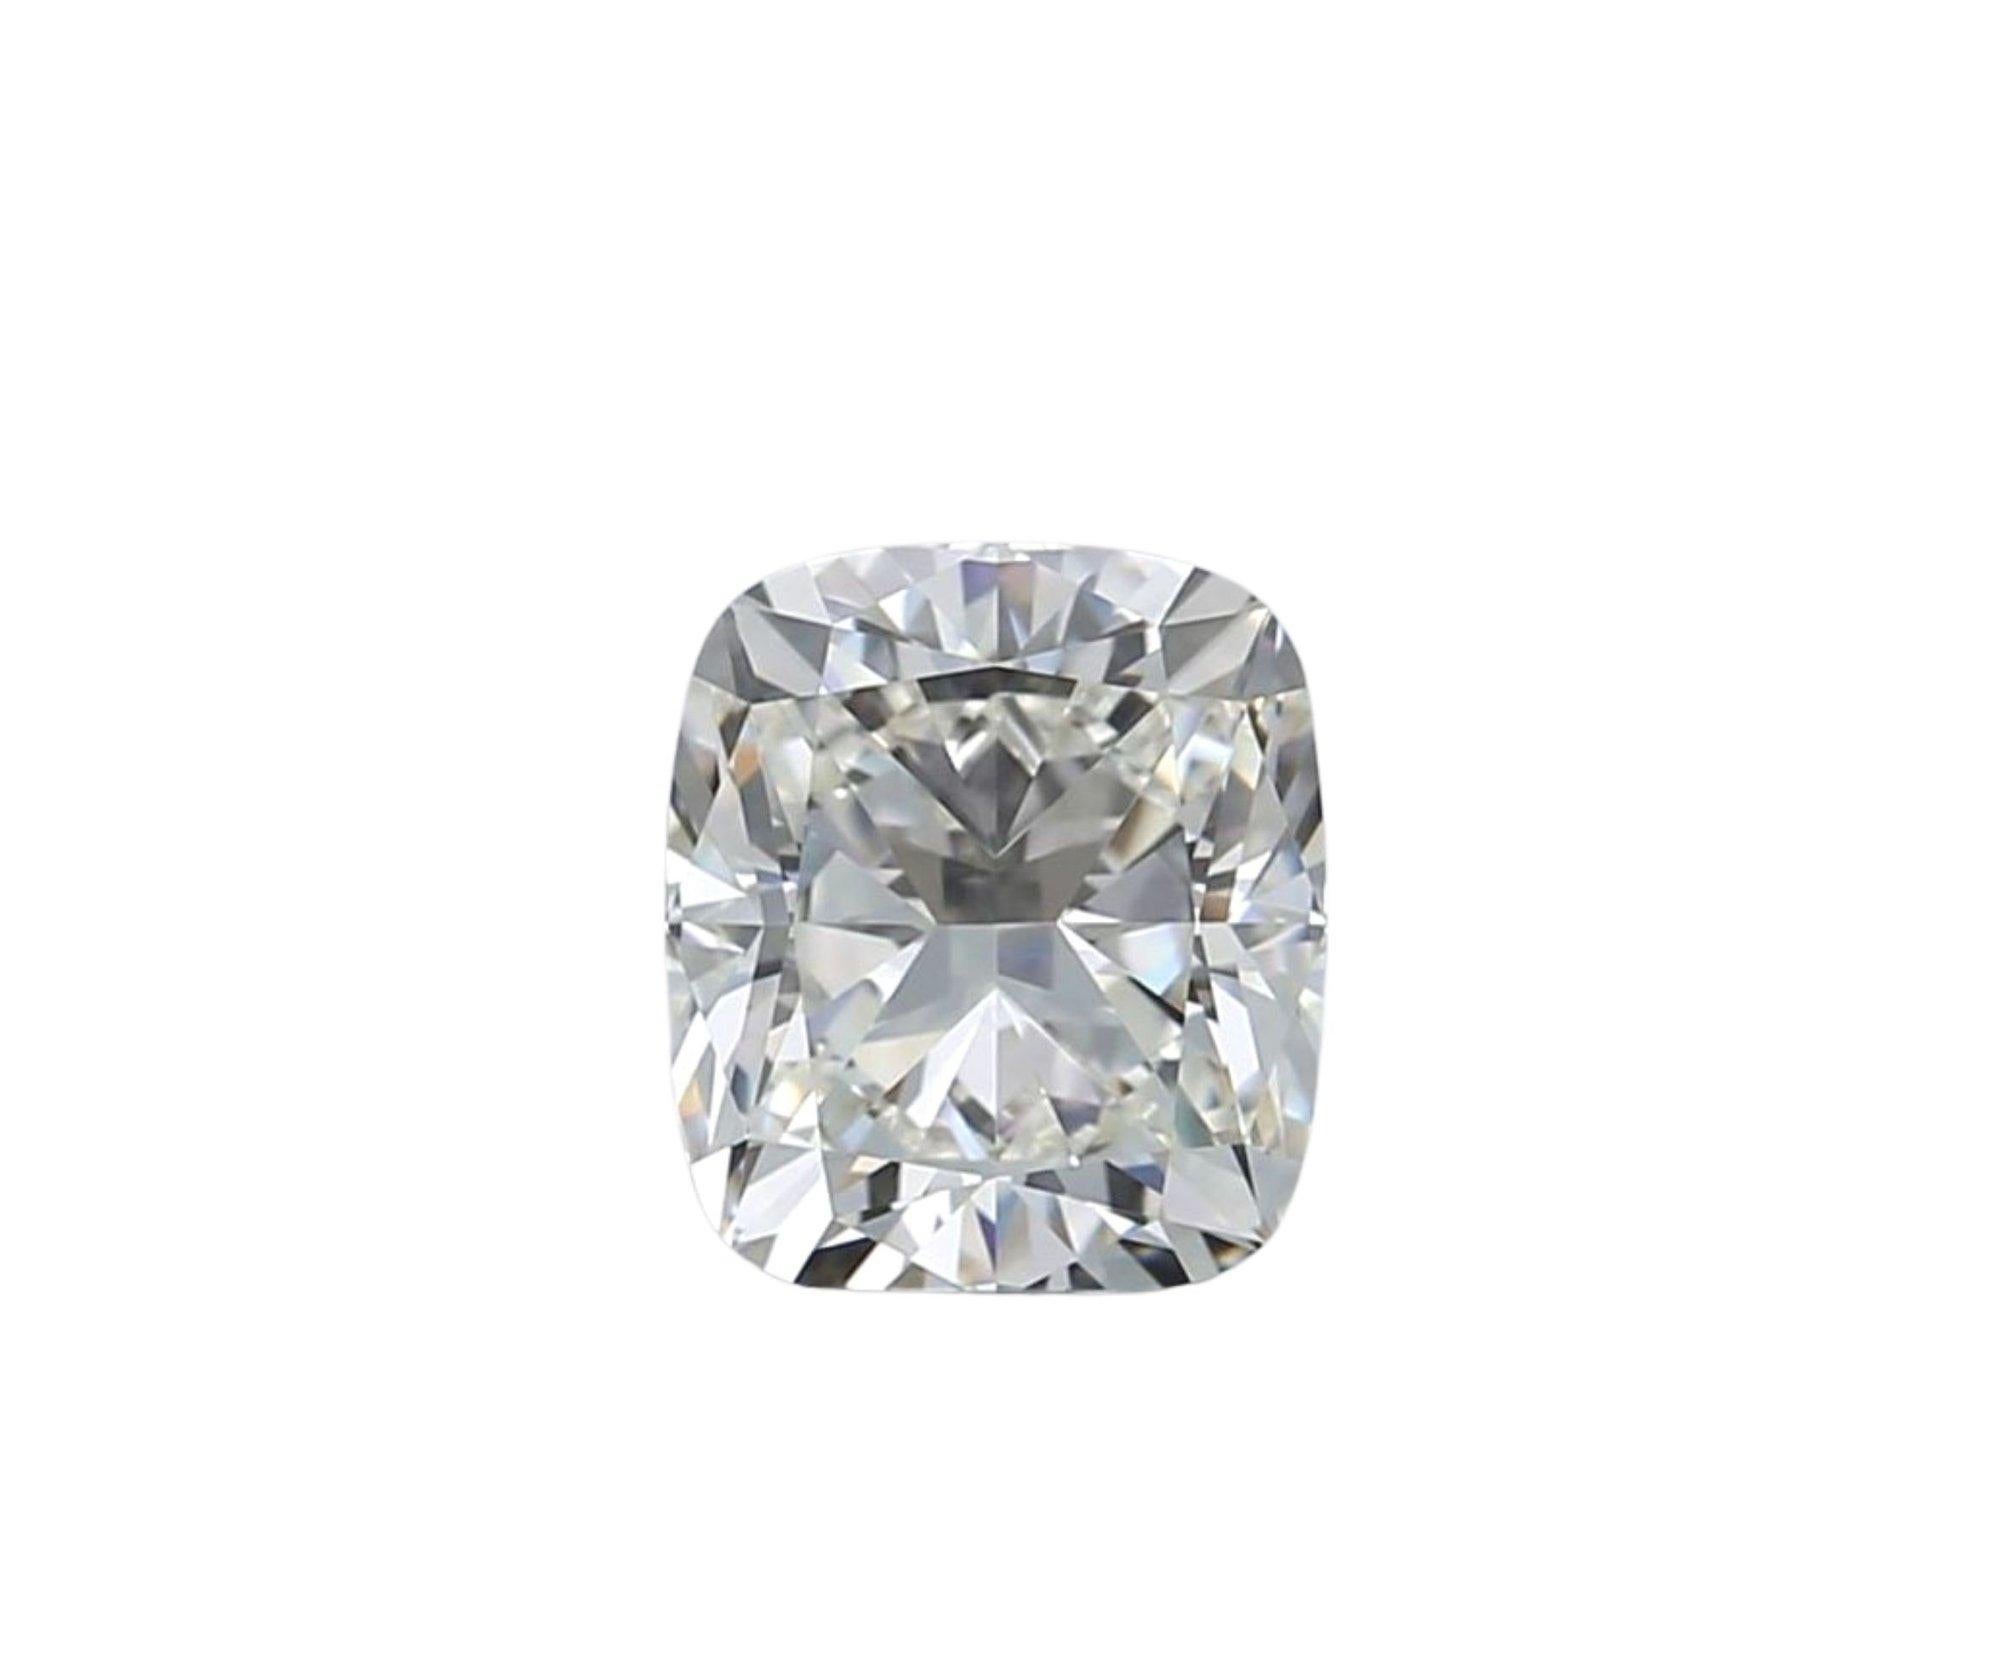 1 Pc Natural Diamond, 1.01 Ct, Cushion, H, IF 'Flawless', IGI Certificate For Sale 2